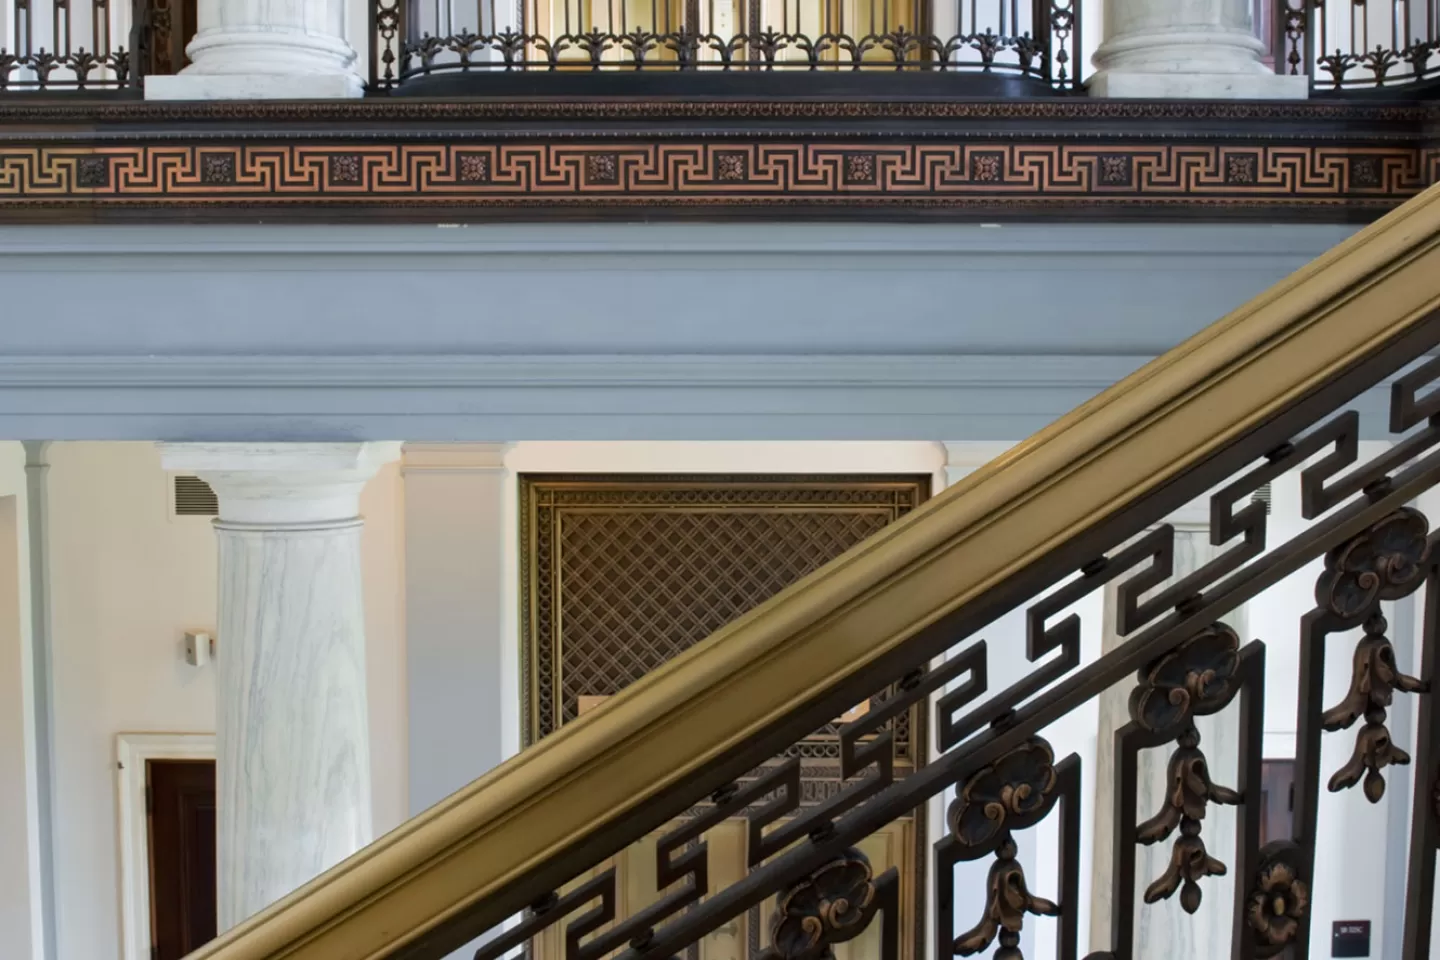 View of elevators and stair railings inside the Russell Senate Office Building.